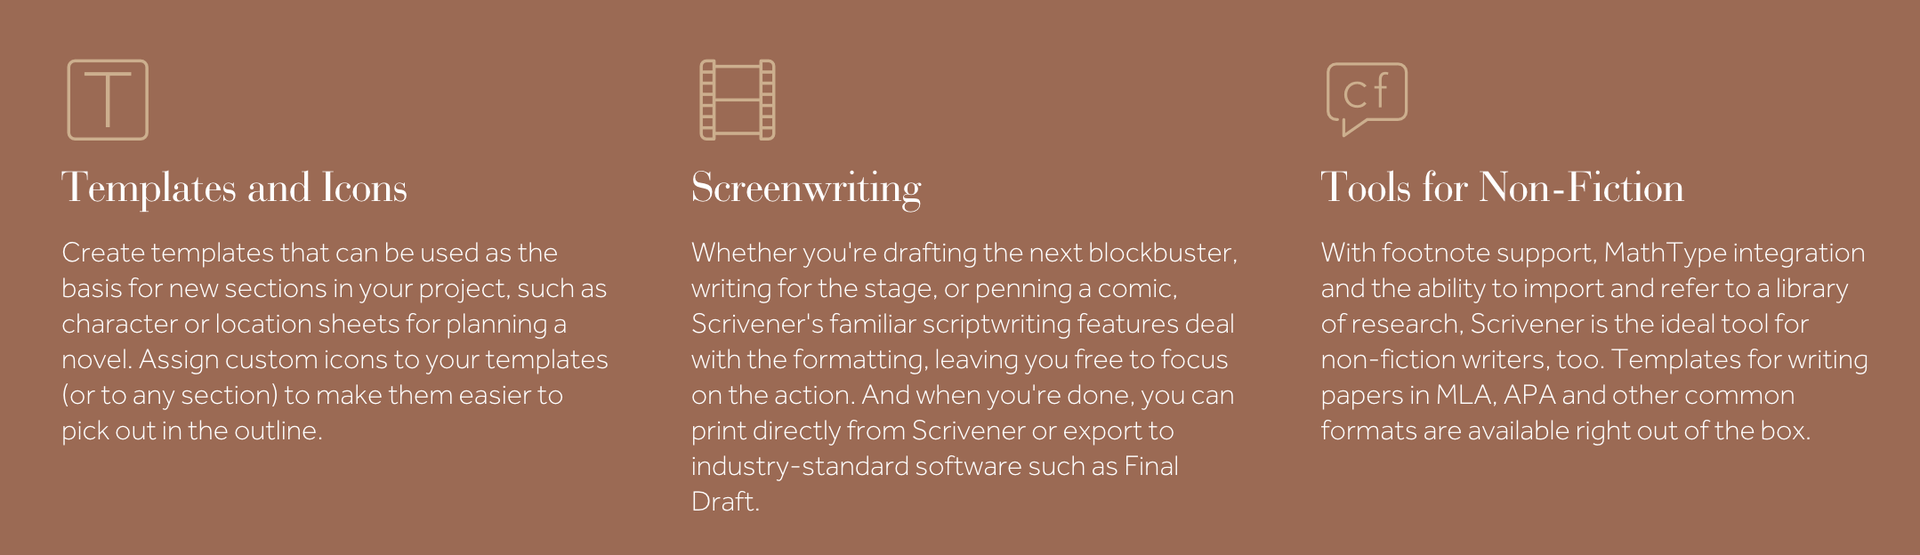 best book writing tool for authors is scrivener